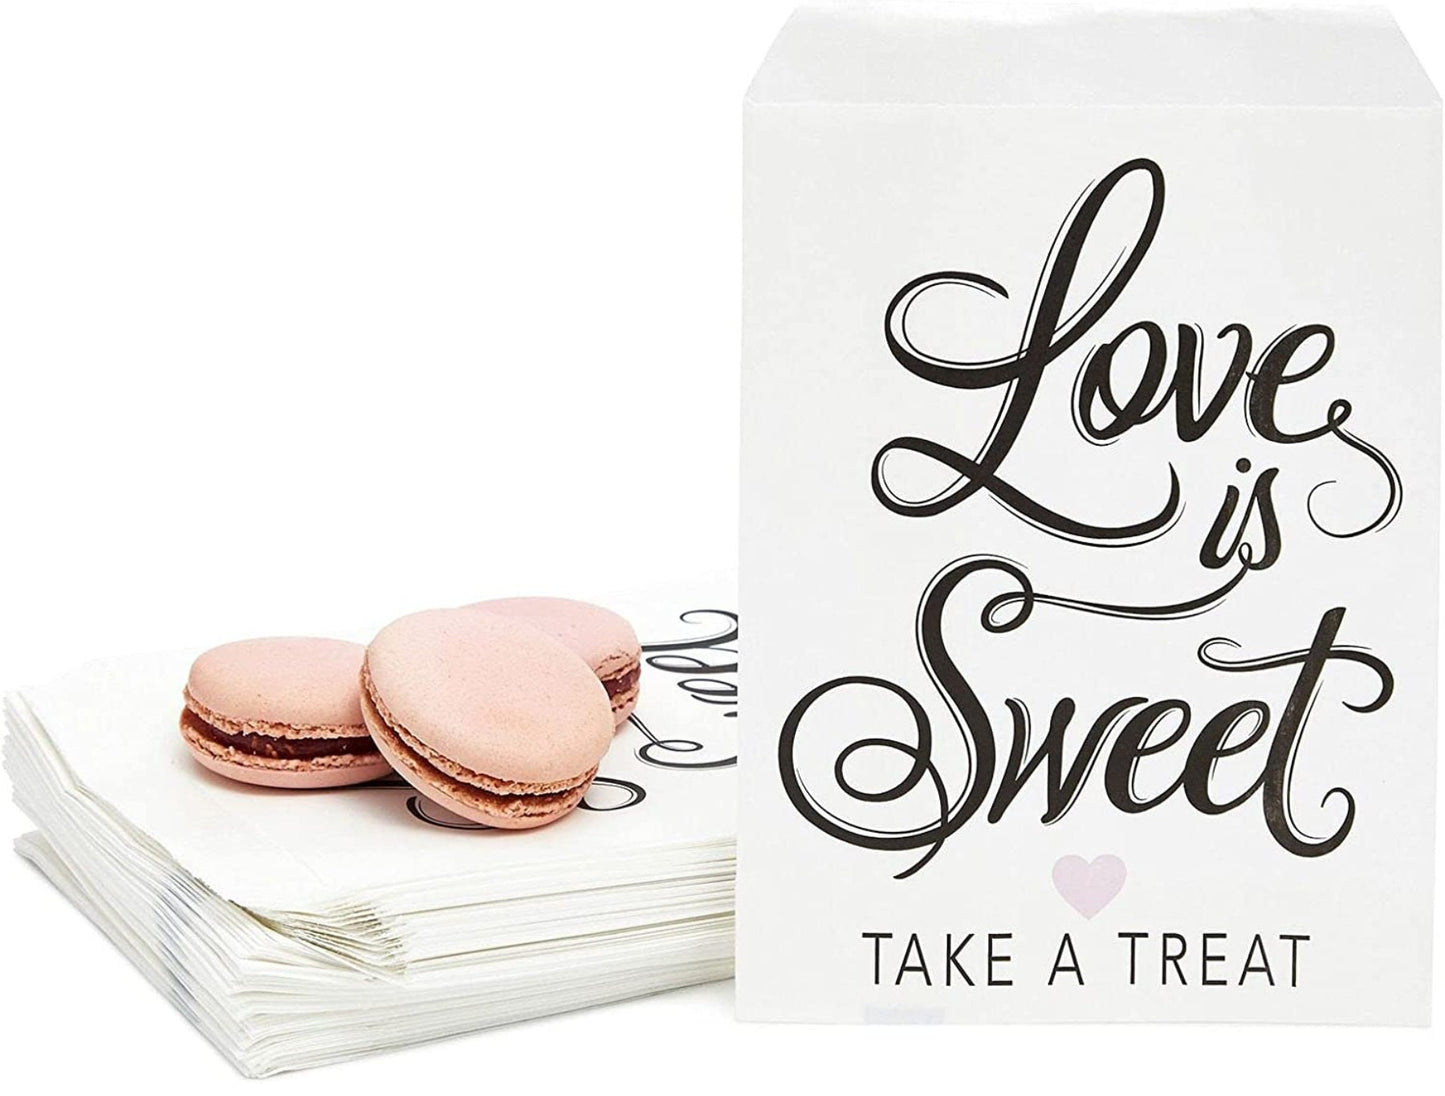 Set of 24 Love Is Sweet Take a Treat Party Favor Bags